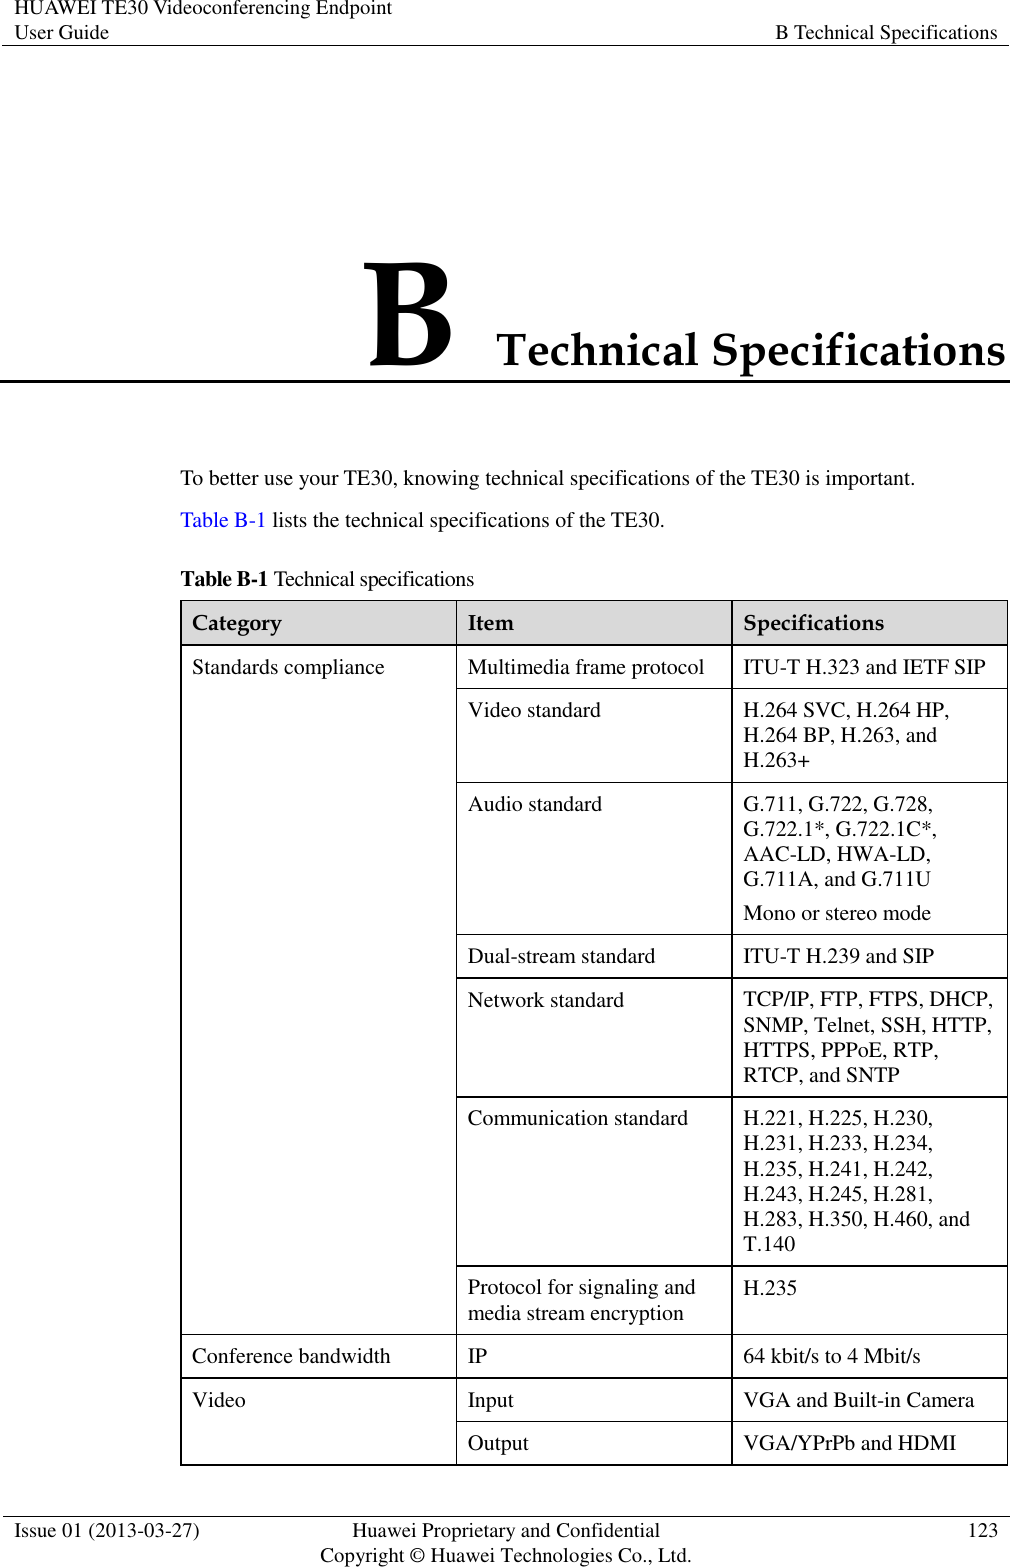 HUAWEI TE30 Videoconferencing Endpoint User Guide B Technical Specifications  Issue 01 (2013-03-27) Huawei Proprietary and Confidential                                     Copyright © Huawei Technologies Co., Ltd. 123  B Technical Specifications To better use your TE30, knowing technical specifications of the TE30 is important. Table B-1 lists the technical specifications of the TE30. Table B-1 Technical specifications Category Item Specifications Standards compliance Multimedia frame protocol ITU-T H.323 and IETF SIP Video standard H.264 SVC, H.264 HP, H.264 BP, H.263, and H.263+ Audio standard G.711, G.722, G.728, G.722.1*, G.722.1C*, AAC-LD, HWA-LD, G.711A, and G.711U Mono or stereo mode Dual-stream standard ITU-T H.239 and SIP Network standard TCP/IP, FTP, FTPS, DHCP, SNMP, Telnet, SSH, HTTP, HTTPS, PPPoE, RTP, RTCP, and SNTP Communication standard H.221, H.225, H.230, H.231, H.233, H.234, H.235, H.241, H.242, H.243, H.245, H.281, H.283, H.350, H.460, and T.140 Protocol for signaling and media stream encryption H.235 Conference bandwidth IP 64 kbit/s to 4 Mbit/s Video Input VGA and Built-in Camera Output VGA/YPrPb and HDMI 